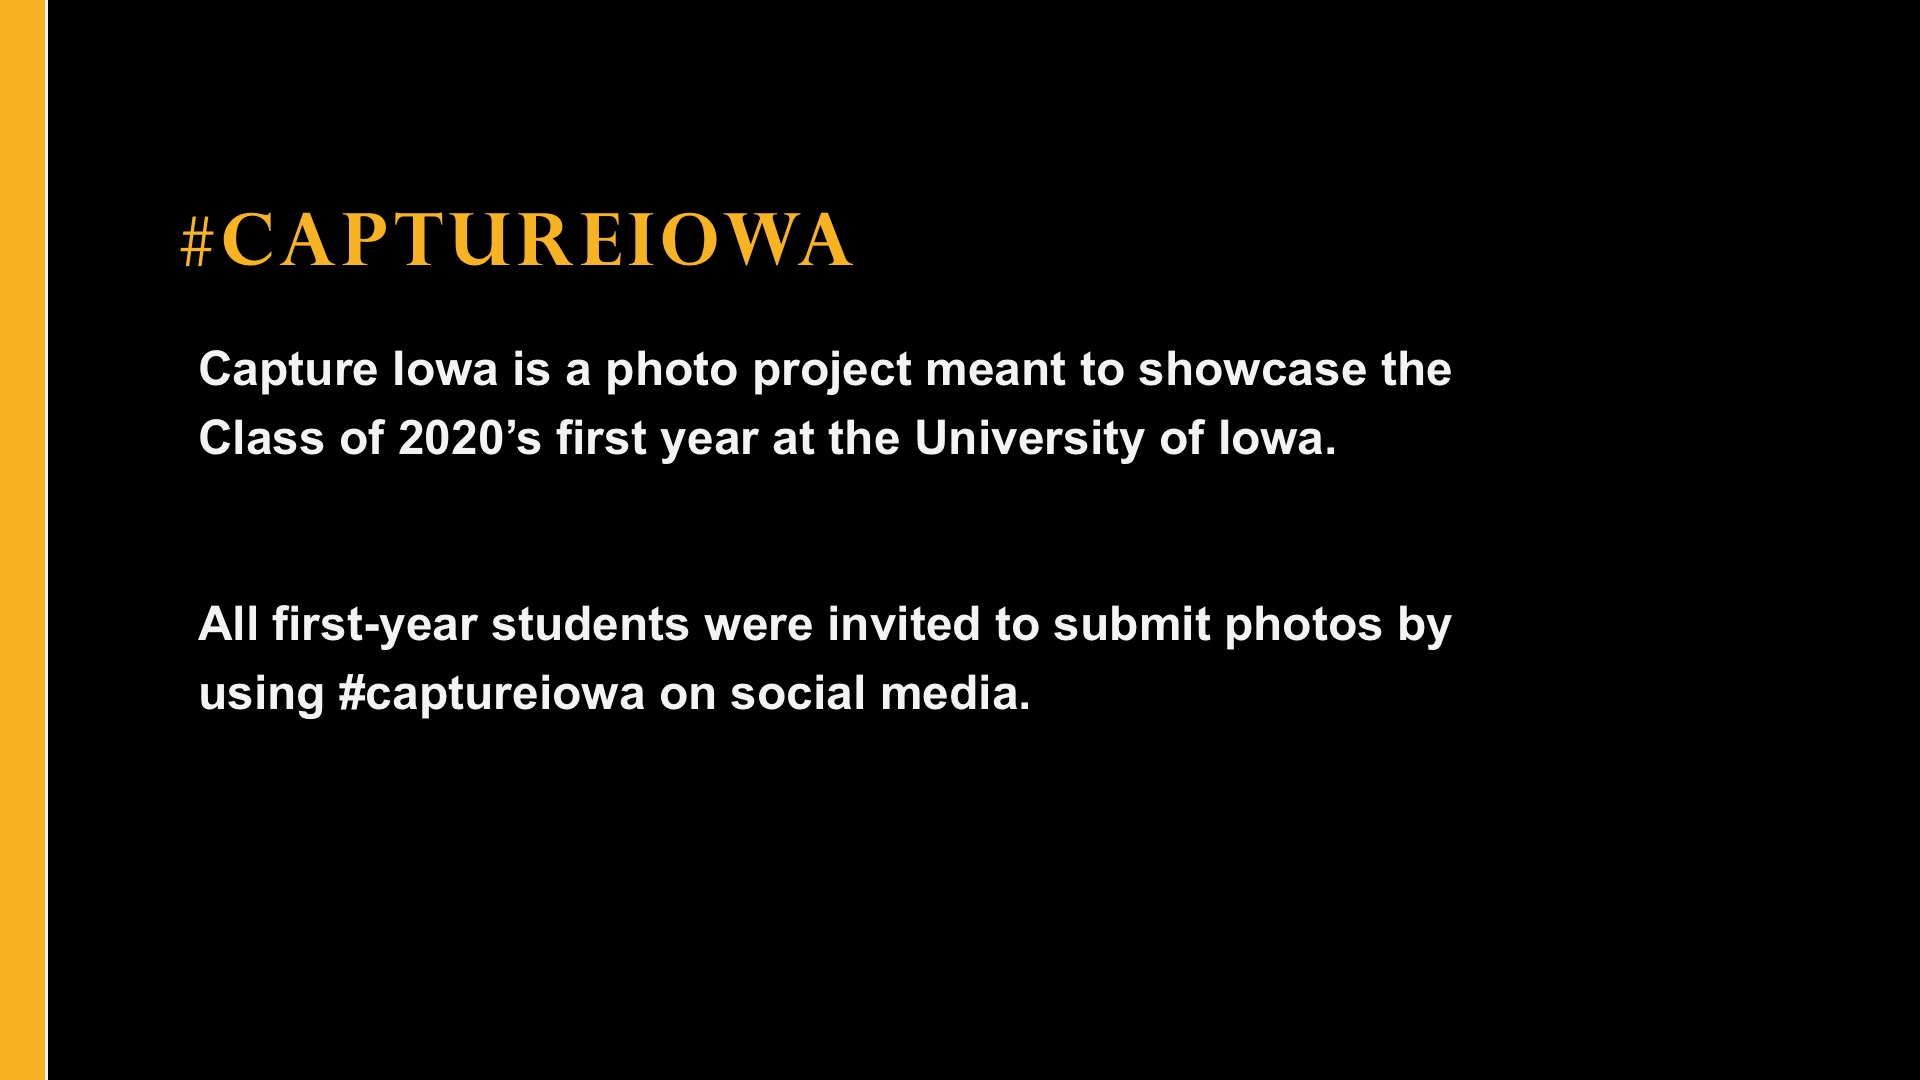 #CaptureIowa Capture Iowa is a photo project meant to showcase the Class of 2020's first year at the University of Iowa. All First-year students were invited to submit photos by using "captureiowa on social media